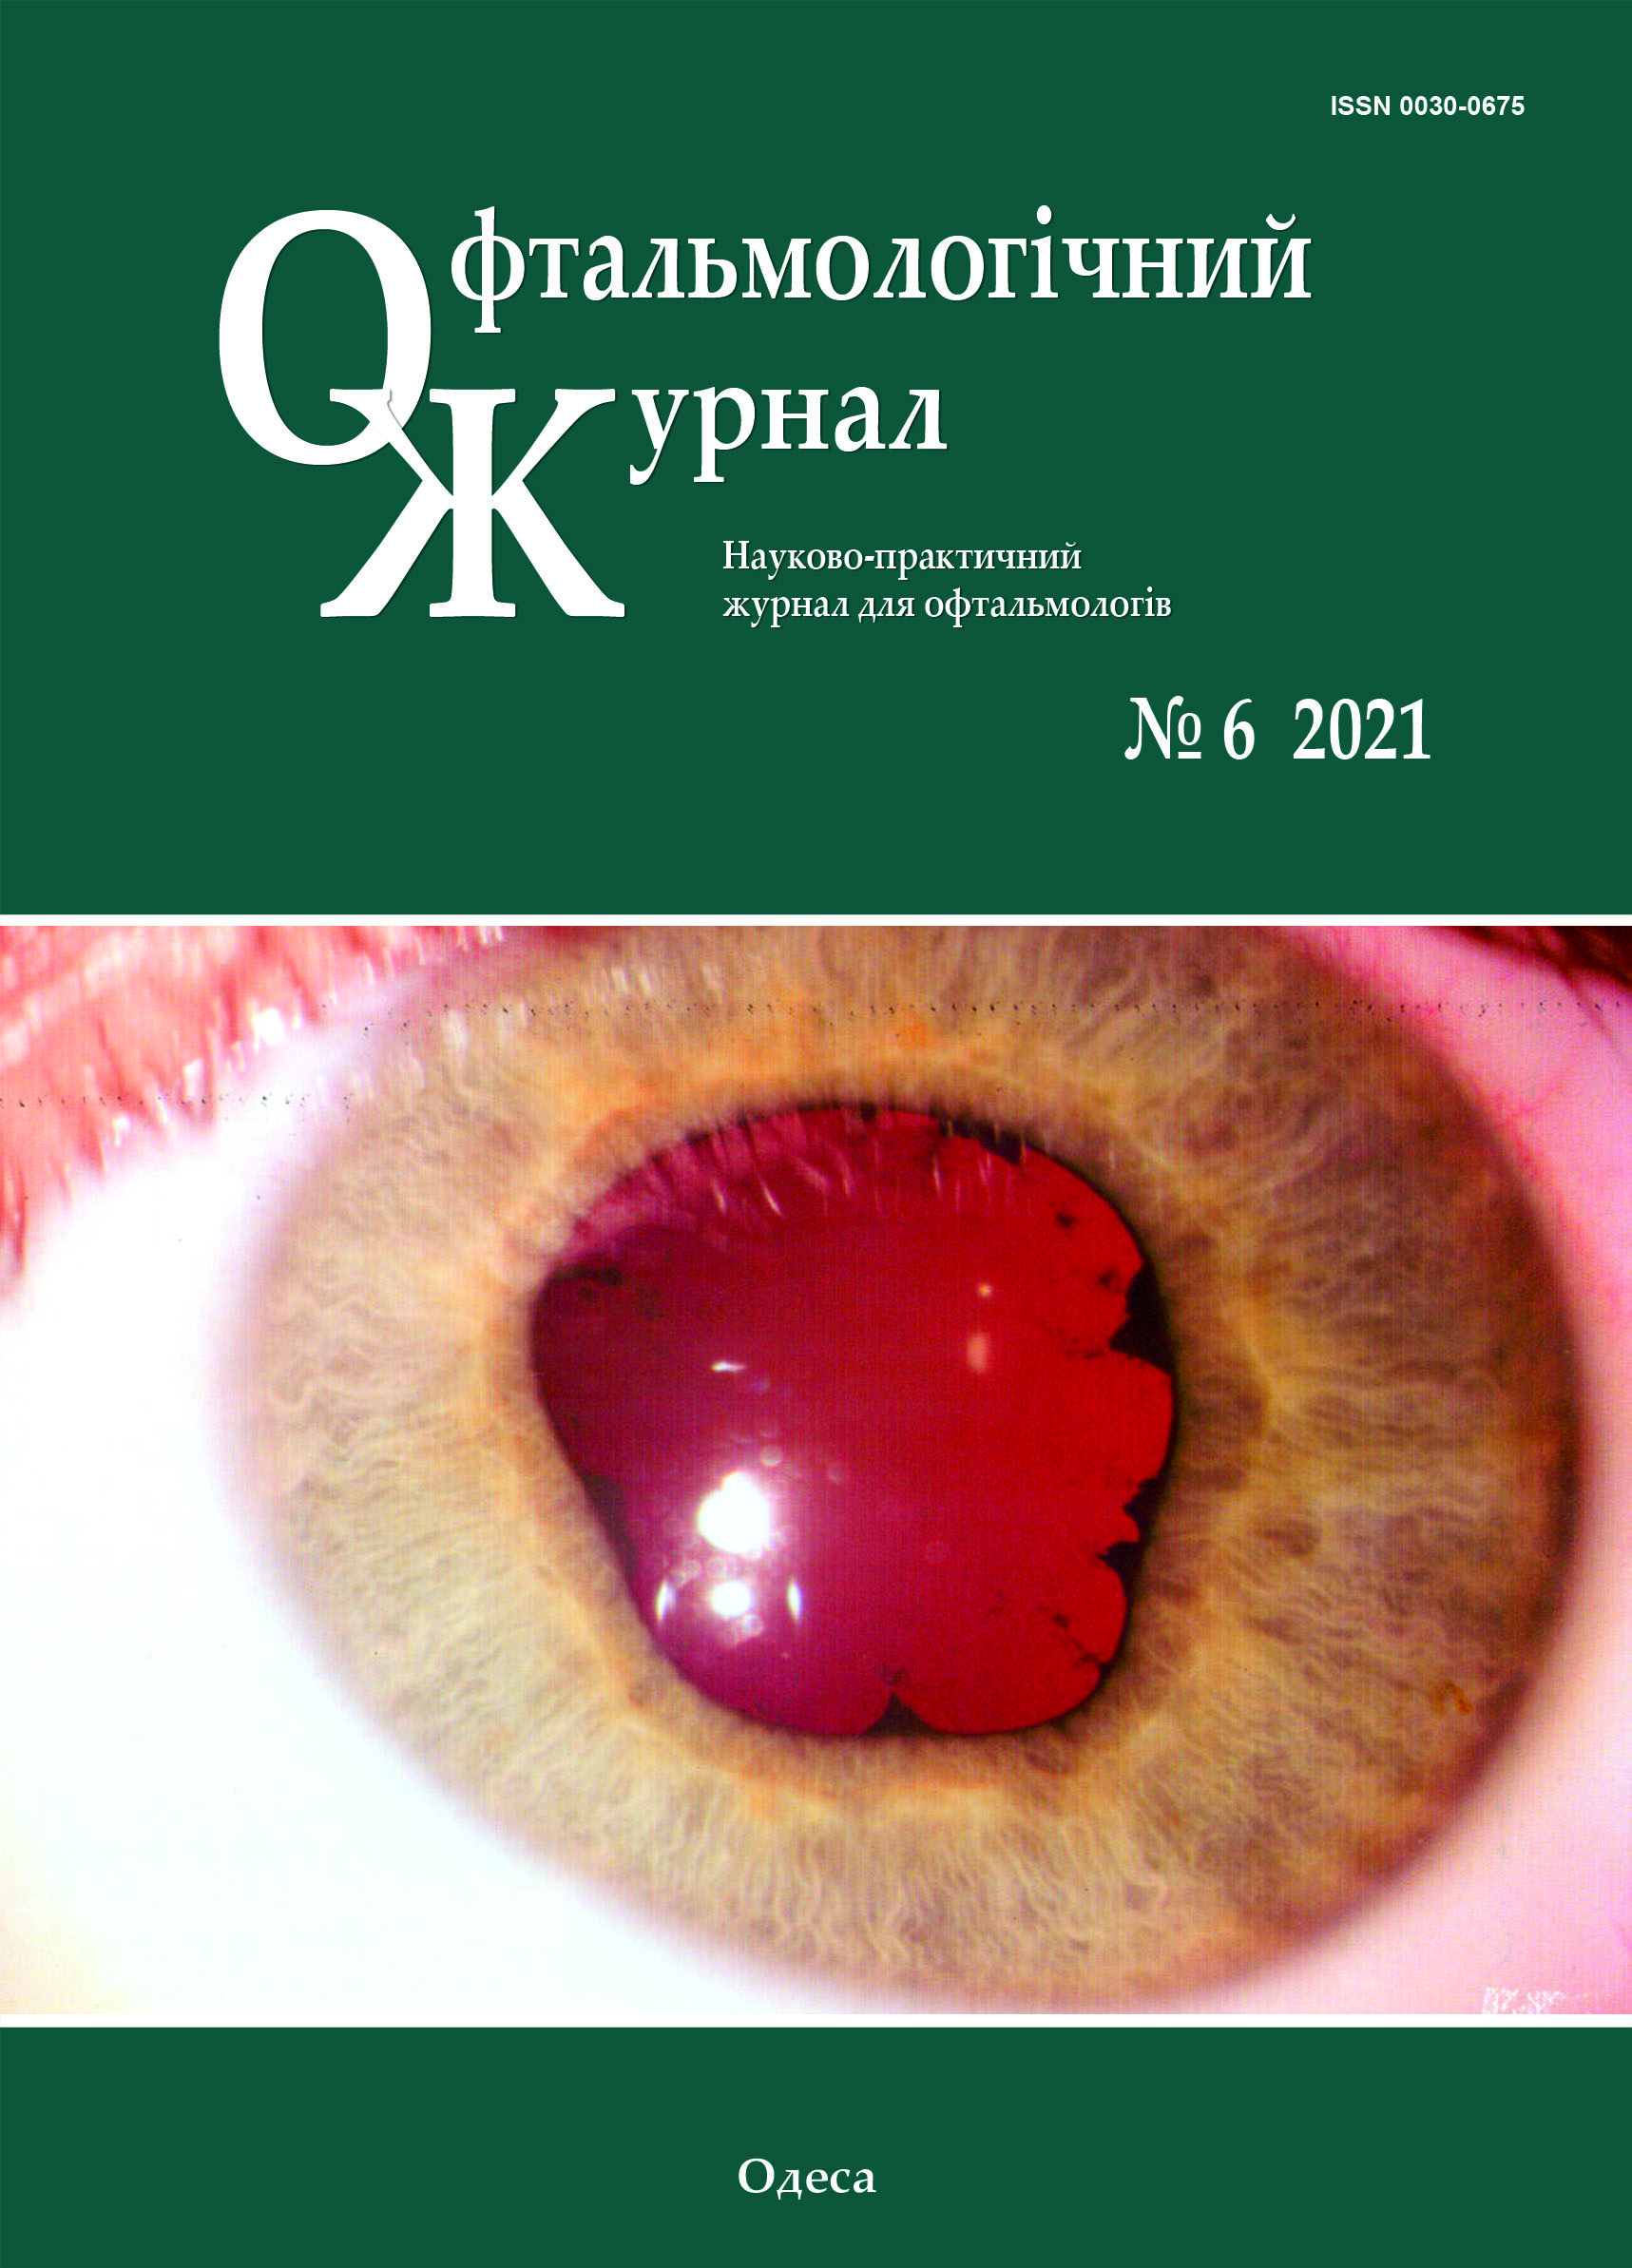 					View Vol. 503 No. 6 (2021): Journal of Ophthalmology (Ukraine)
				